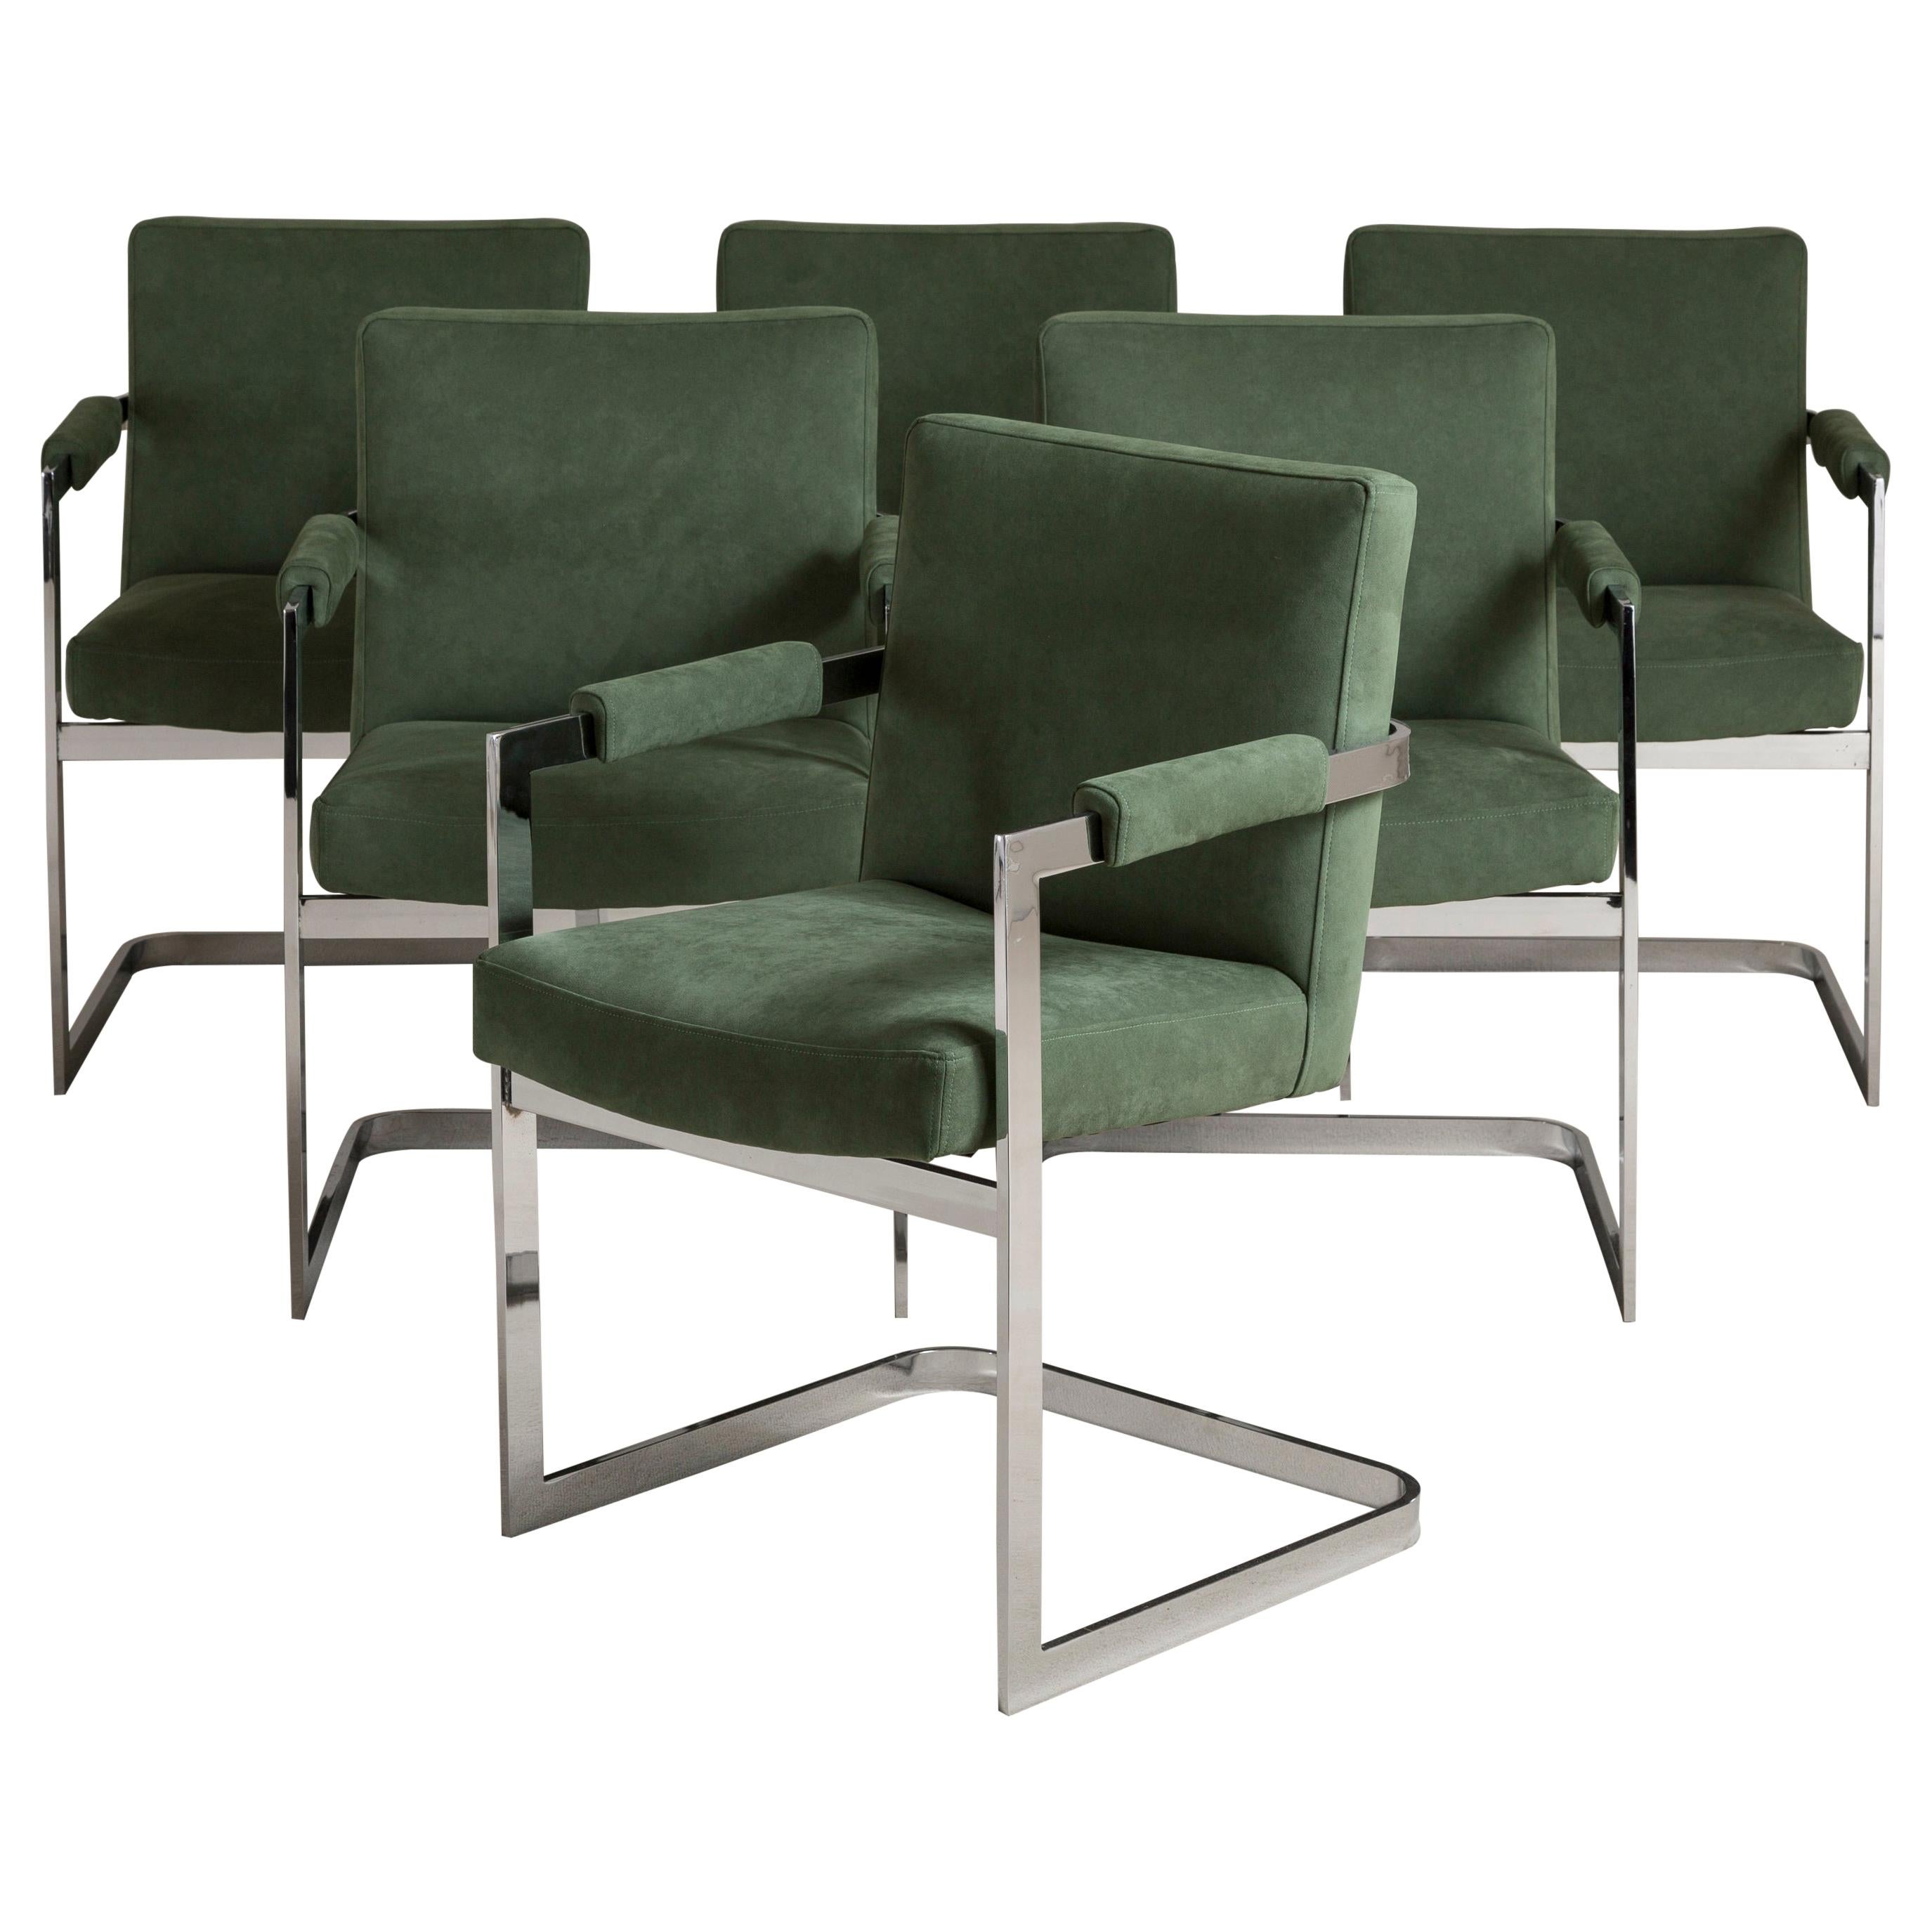 Set of Six Chromium Steel Cantilevered Armchairs, 1970s